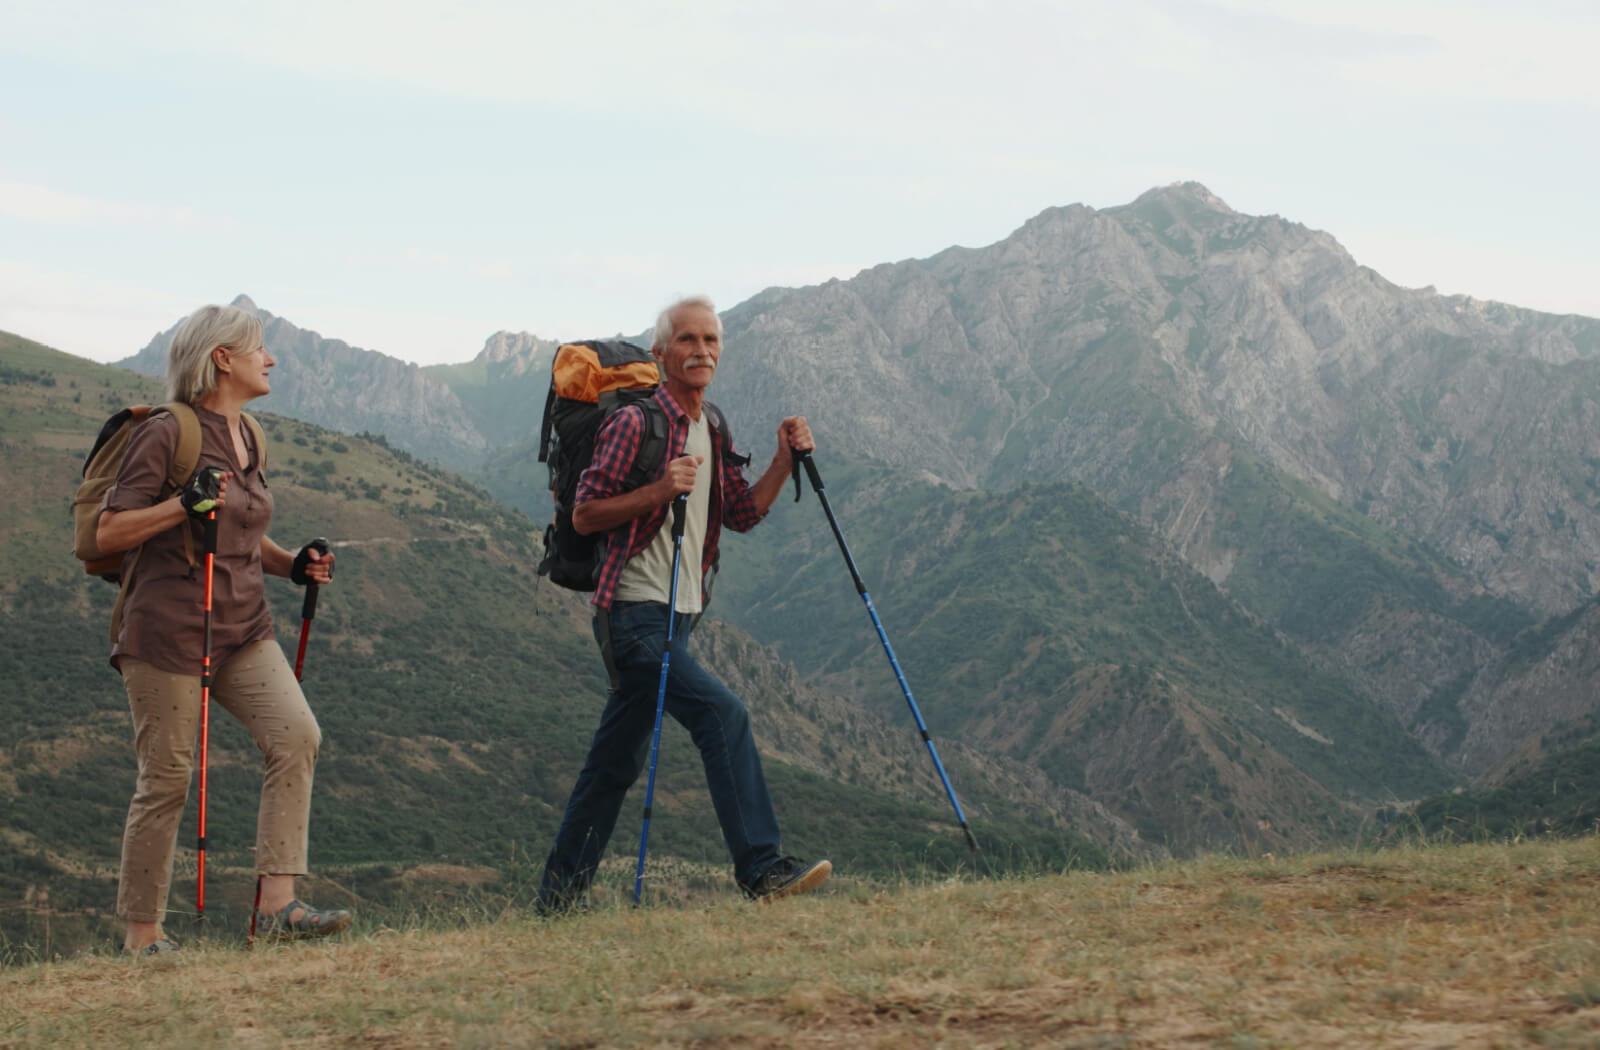 An active senior couple enjoying their mountain hike. Both of them with hiking backpacks and hiking poles